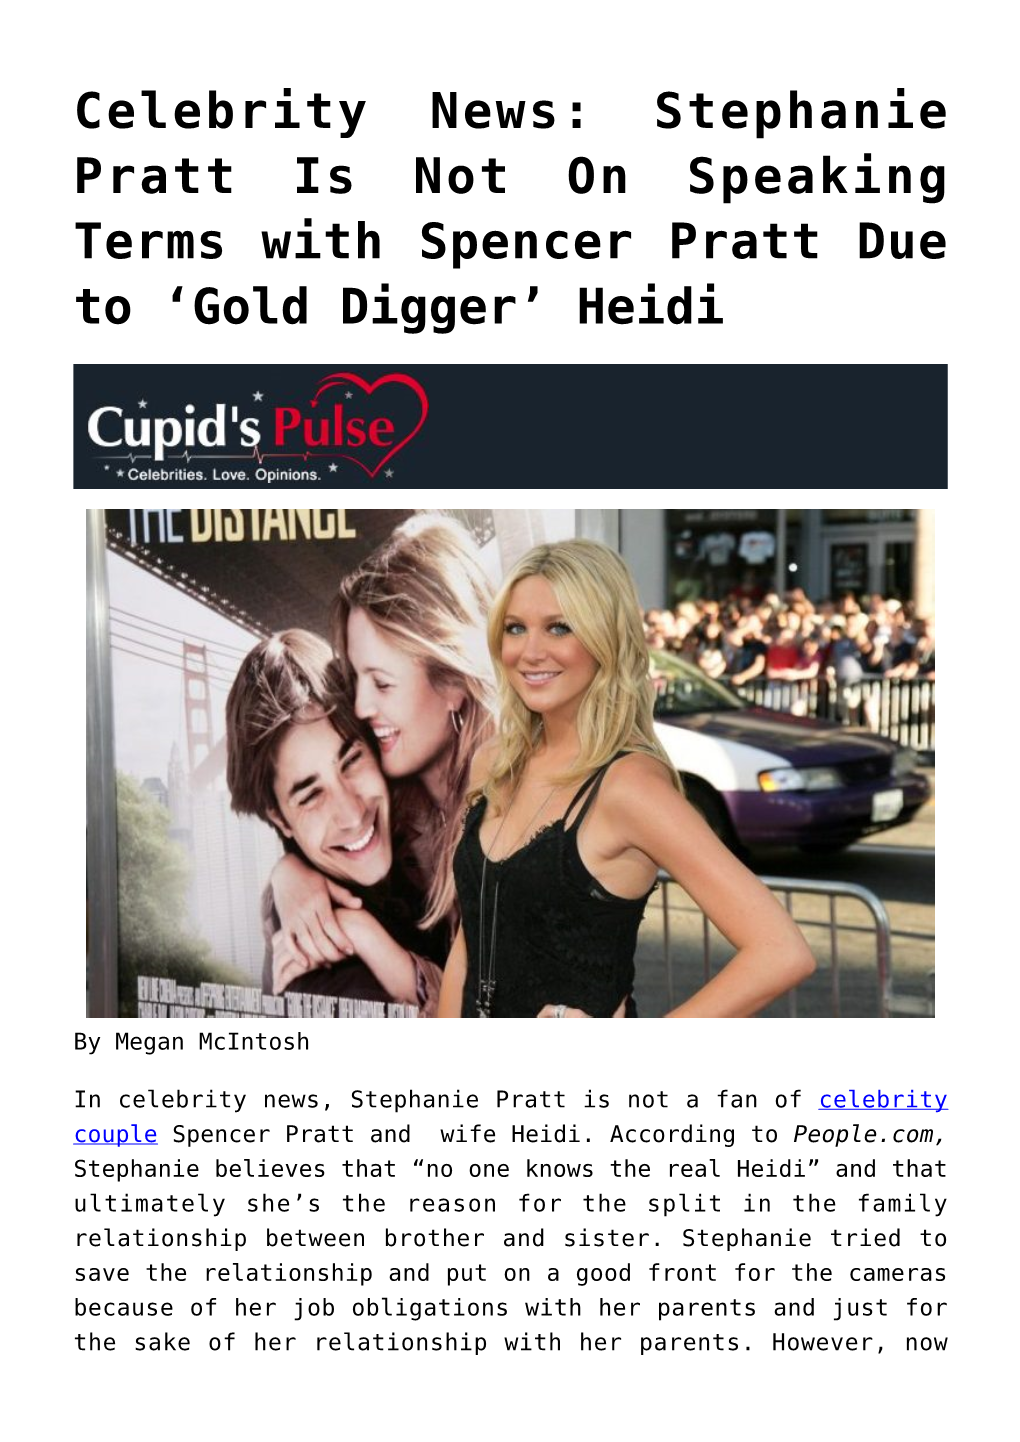 Celebrity News: Stephanie Pratt Is Not on Speaking Terms with Spencer Pratt Due to ‘Gold Digger’ Heidi